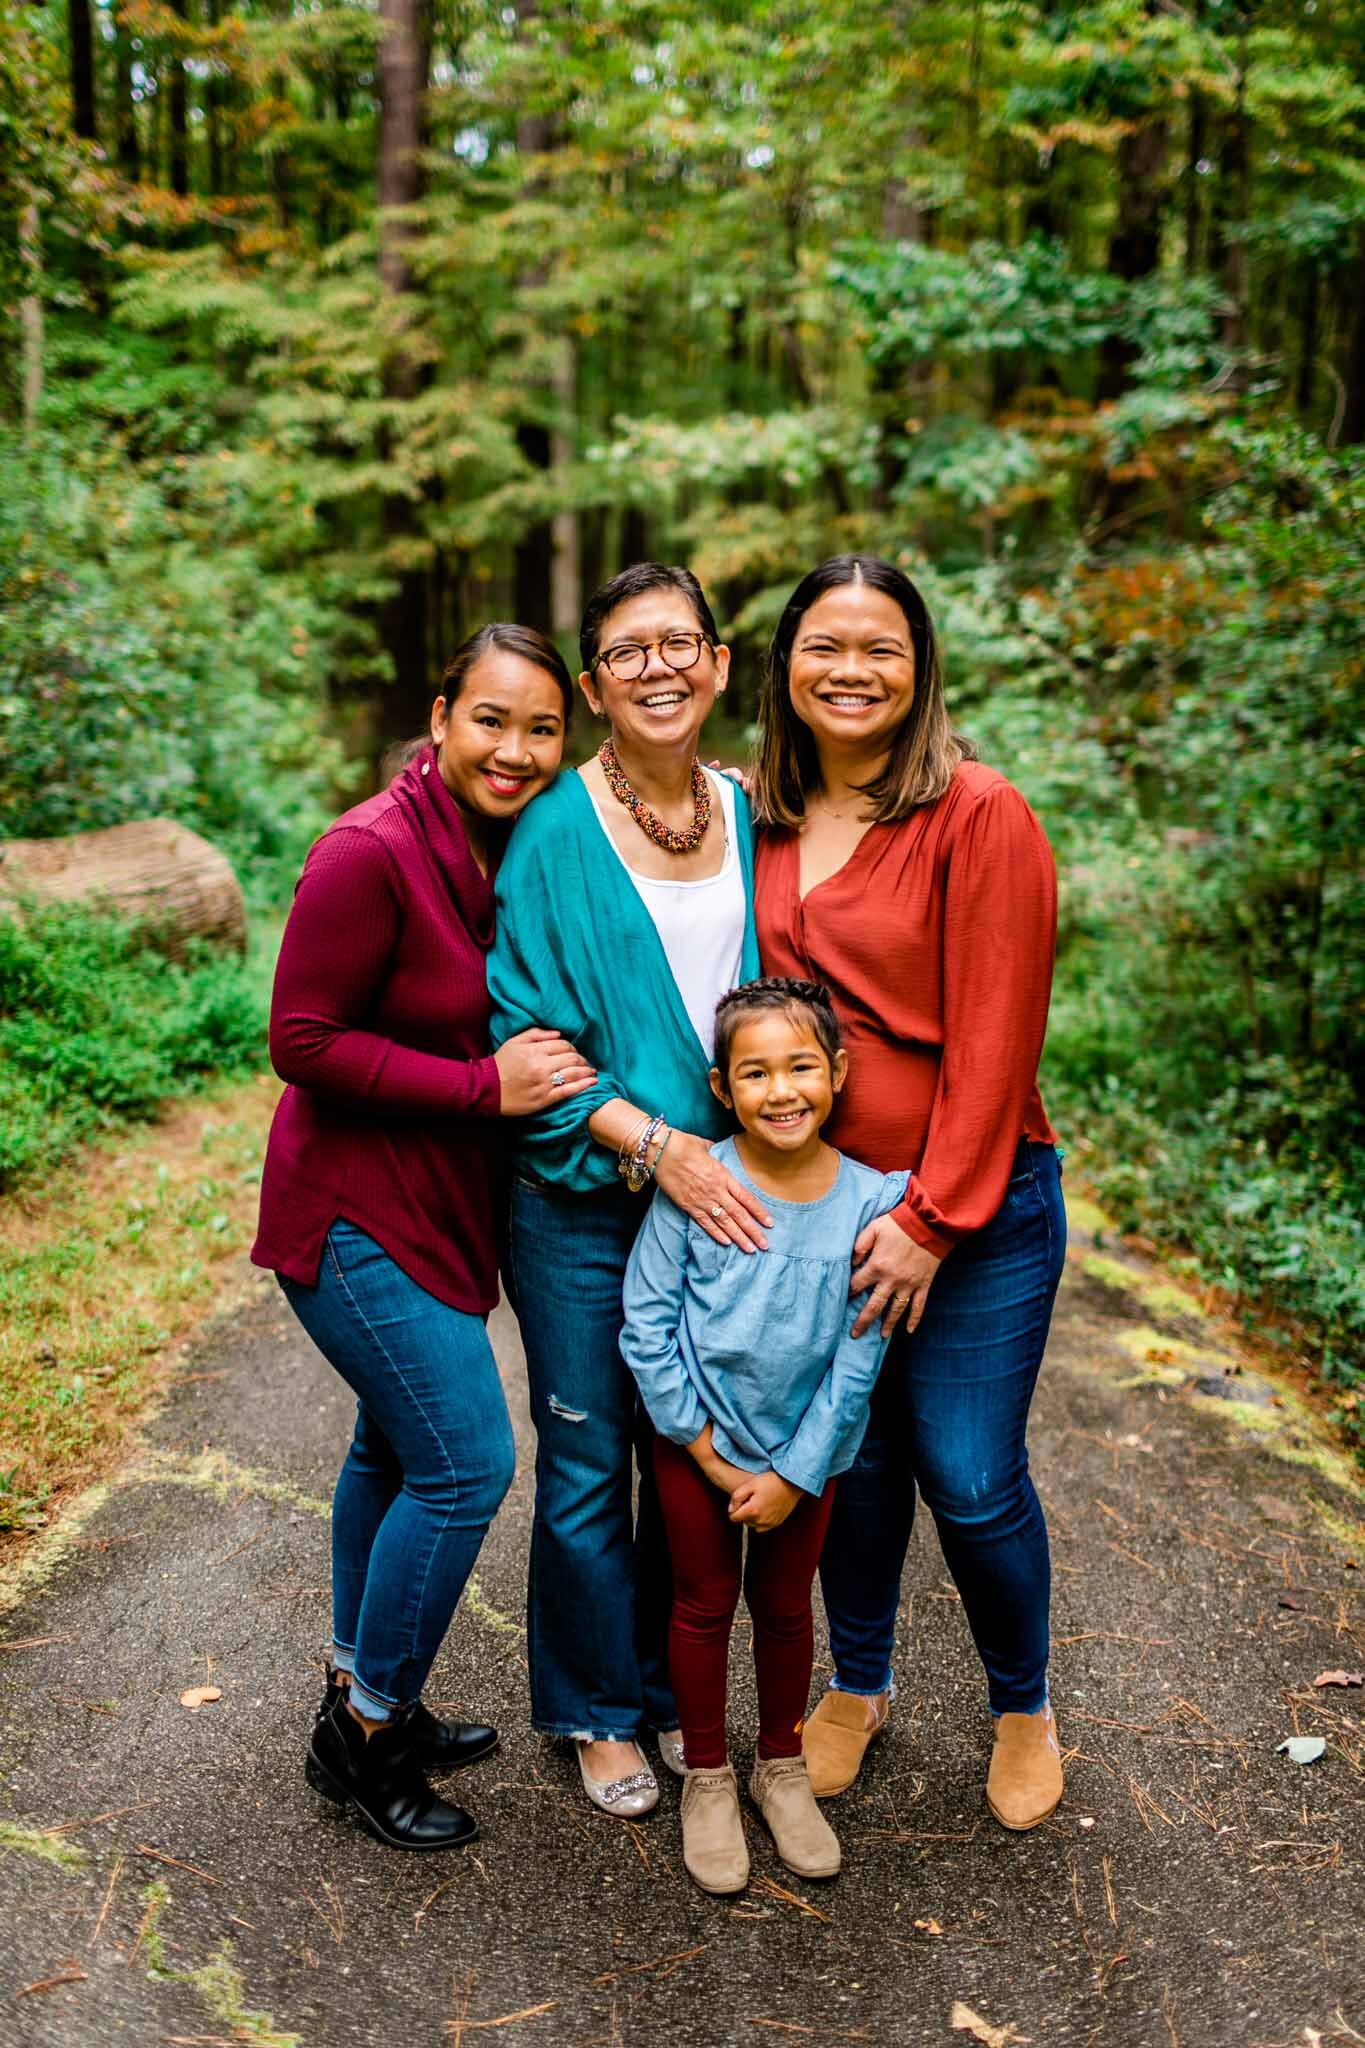 Raleigh Family Photographer | By G. Lin Photography | Umstead Park | Candid fall photo of female family members